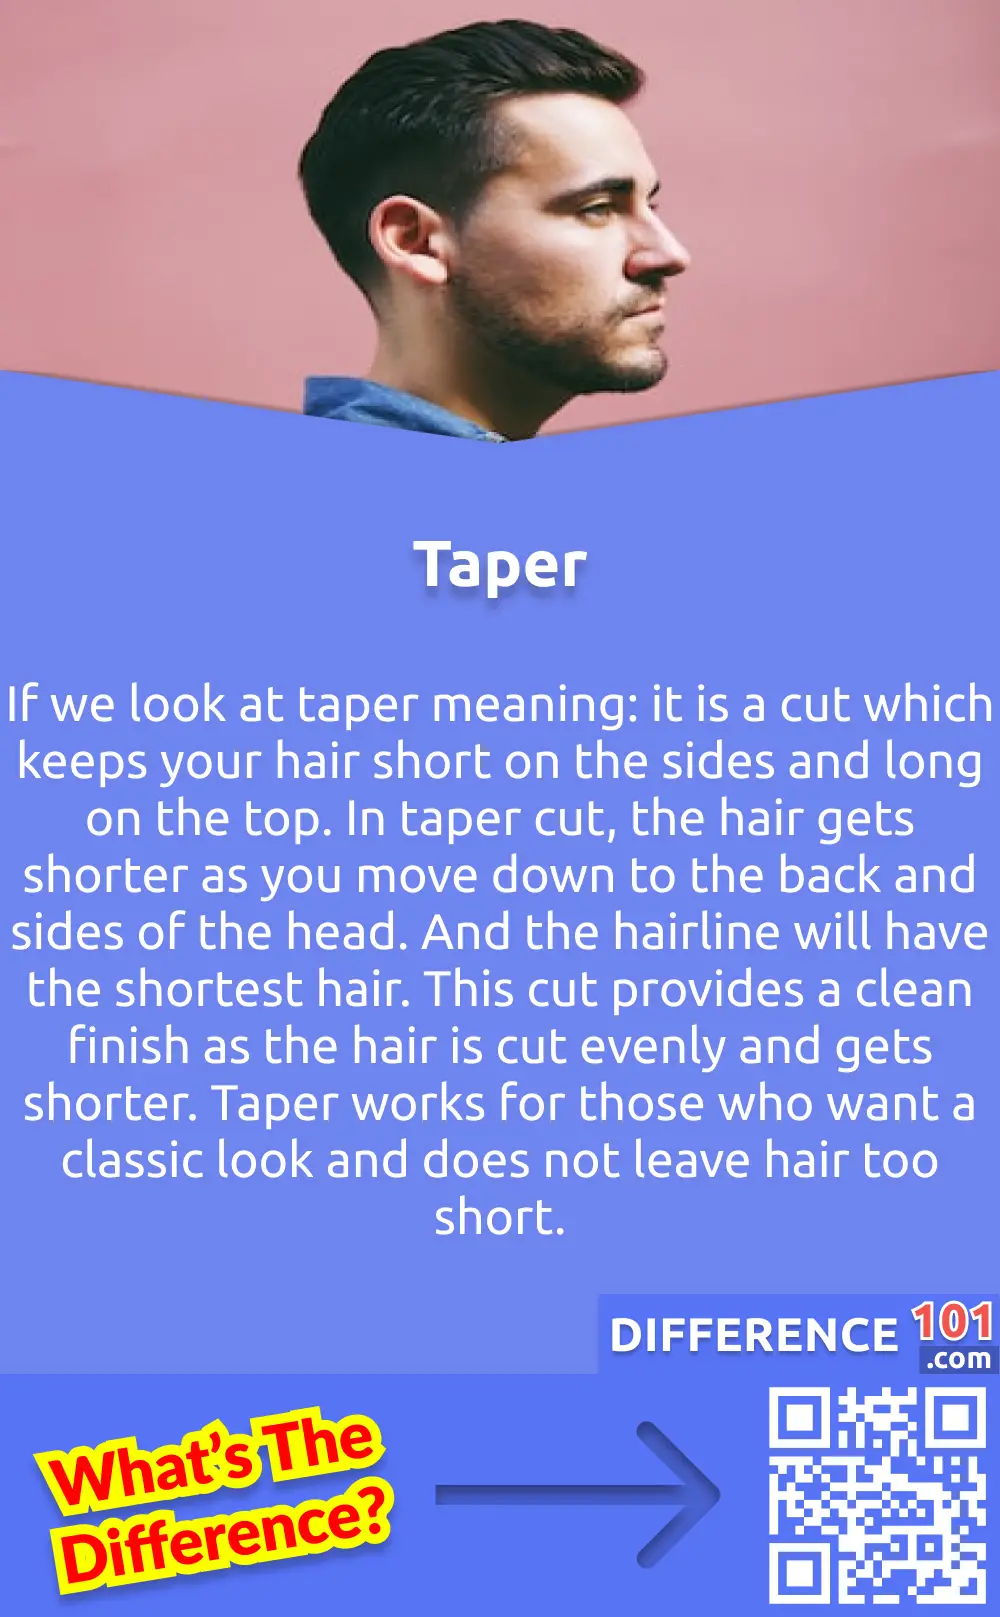 What Is A Taper? If we look at taper meaning: it is a cut which keeps your hair short on the sides and long on the top. In taper cut, the hair gets shorter as you move down to the back and sides of the head. And the hairline will have the shortest hair. This cut provides a clean finish as the hair is cut evenly and gets shorter. Taper works for those who want a classic look and does not leave hair too short. This cut also gives the opportunity to try different styles as your hair grows. There are a lot of hairstyles which have taper haircut styles in them. Some common taper styles are: "Low taper"; in this, the hair gets shorter above the ears. This cut can give a clean look without cutting too much hair length. Or "High taper", in this cut, the hair is shortened an inch above the low taper. This style often mixes with other cuts to create a combo.